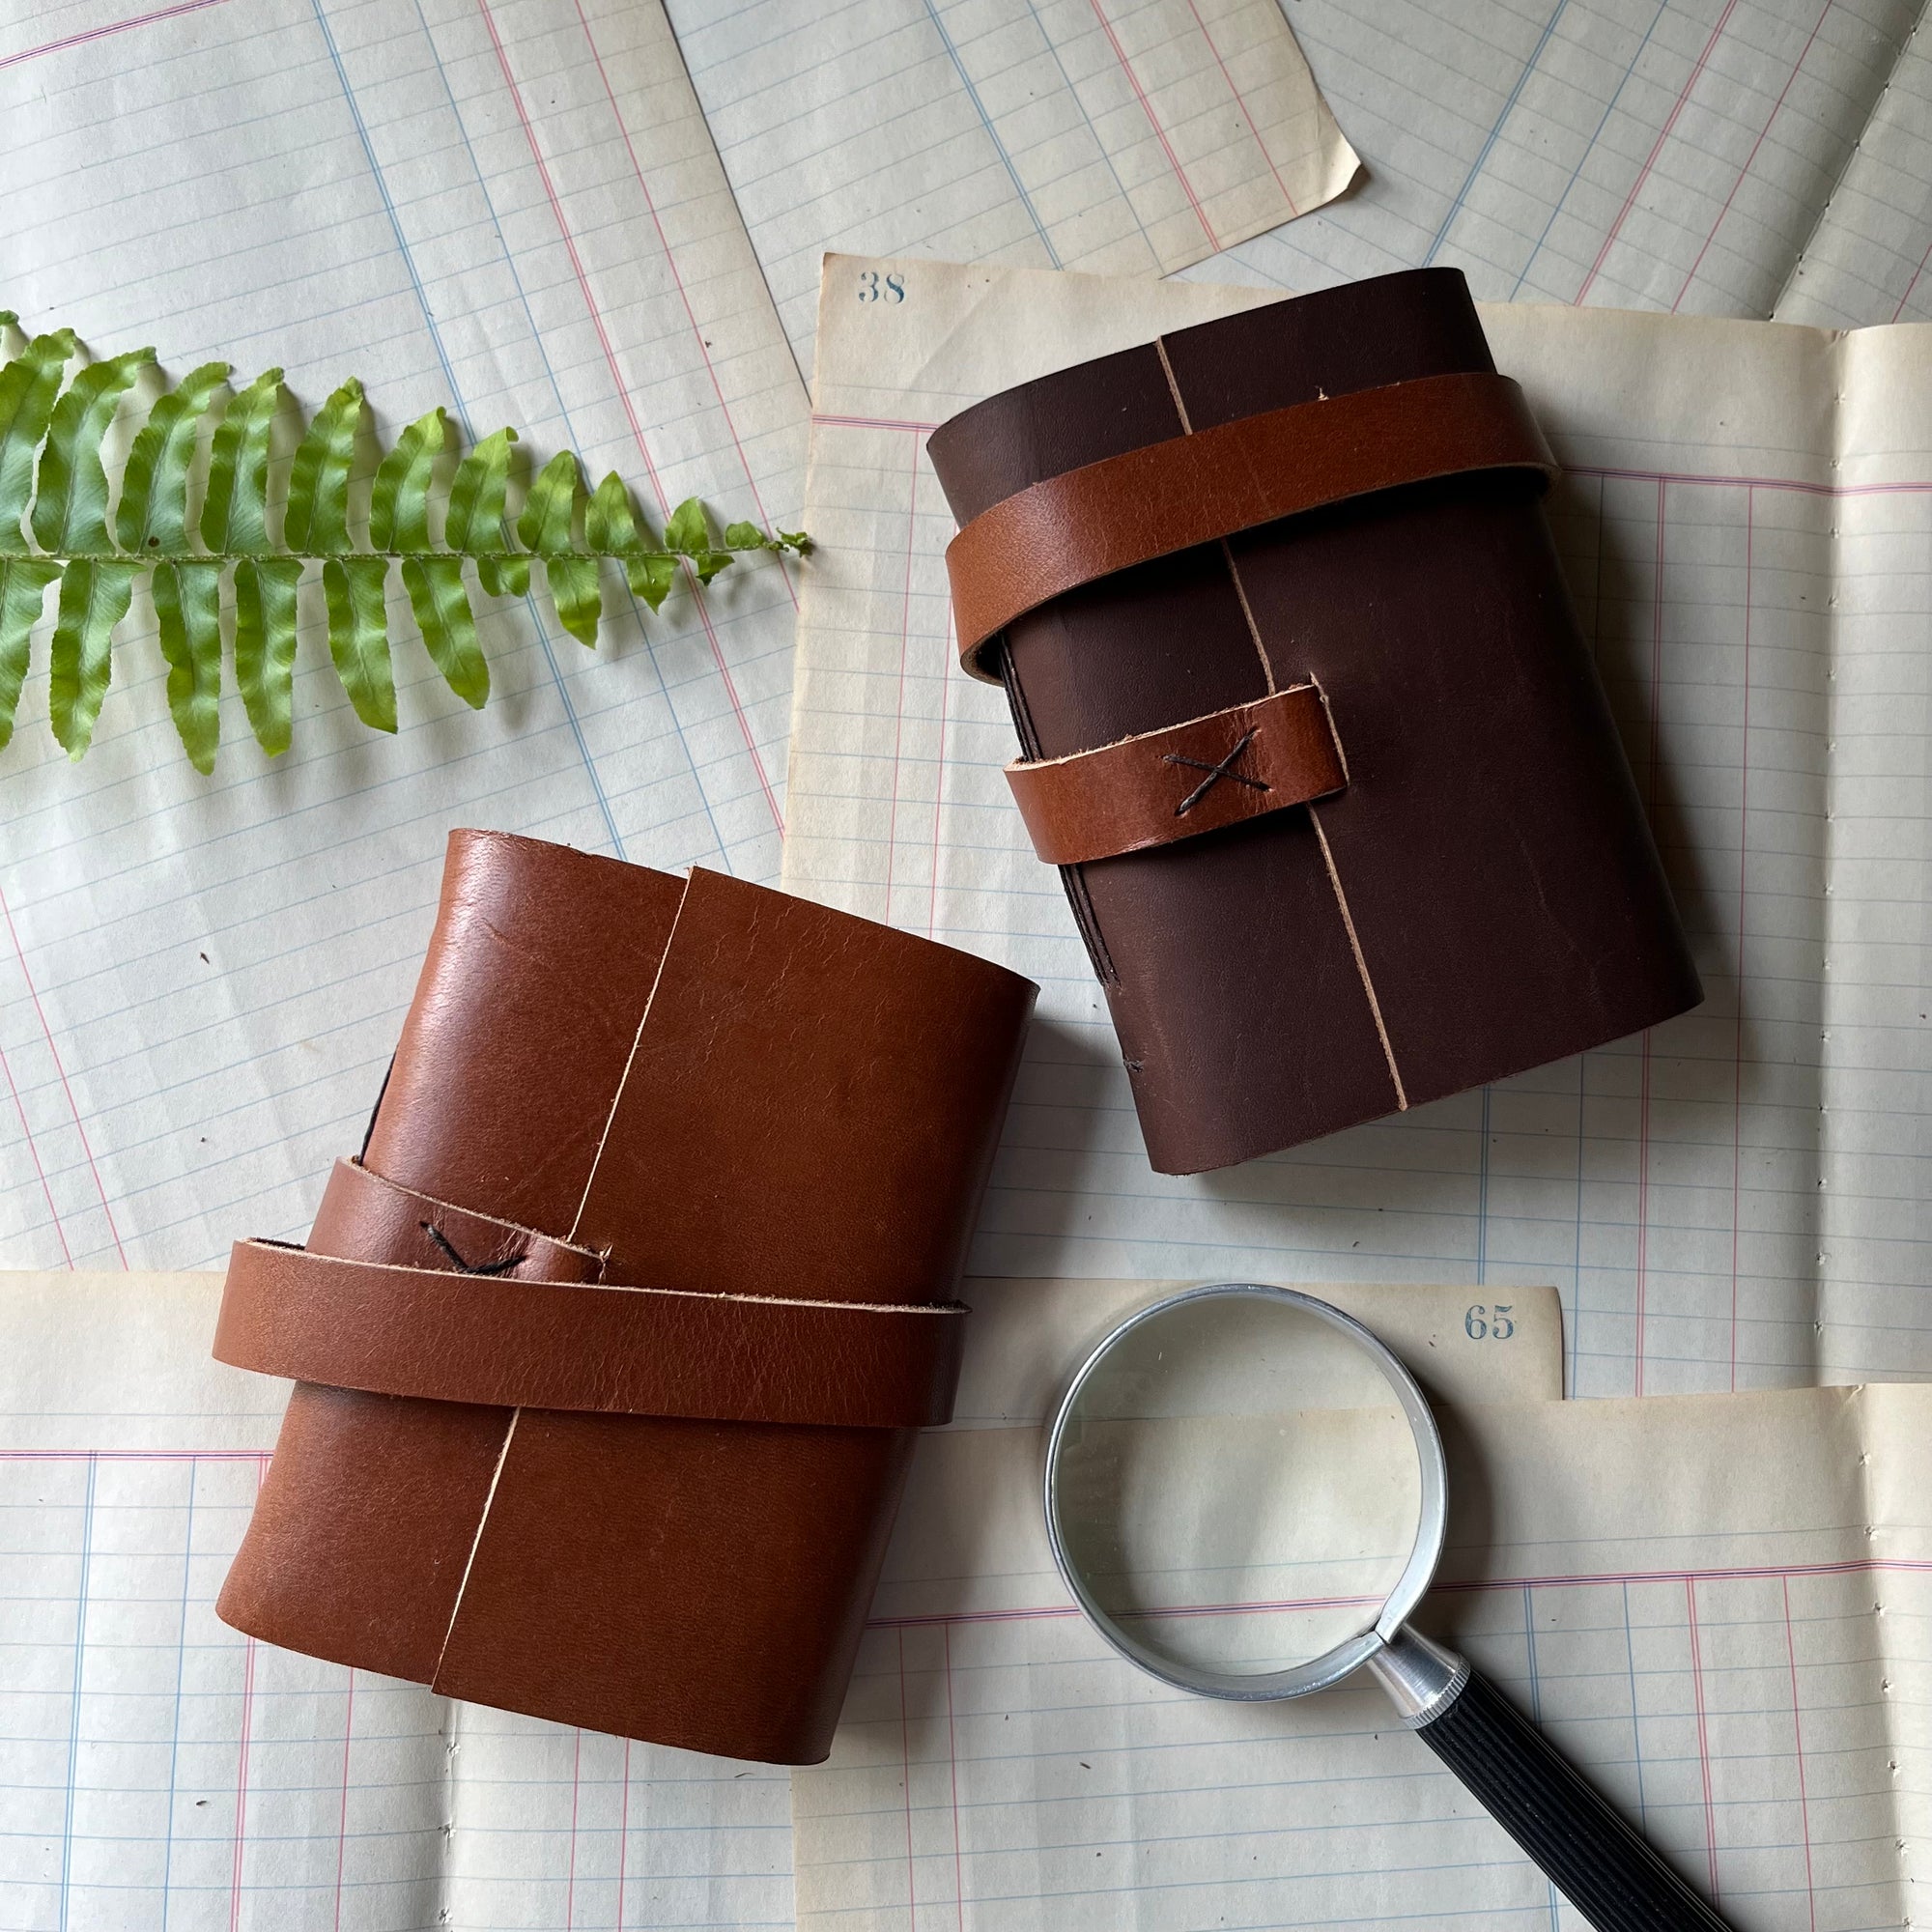 Blank Leather Travel Journals - handmade leather travel journal - view of the front covers